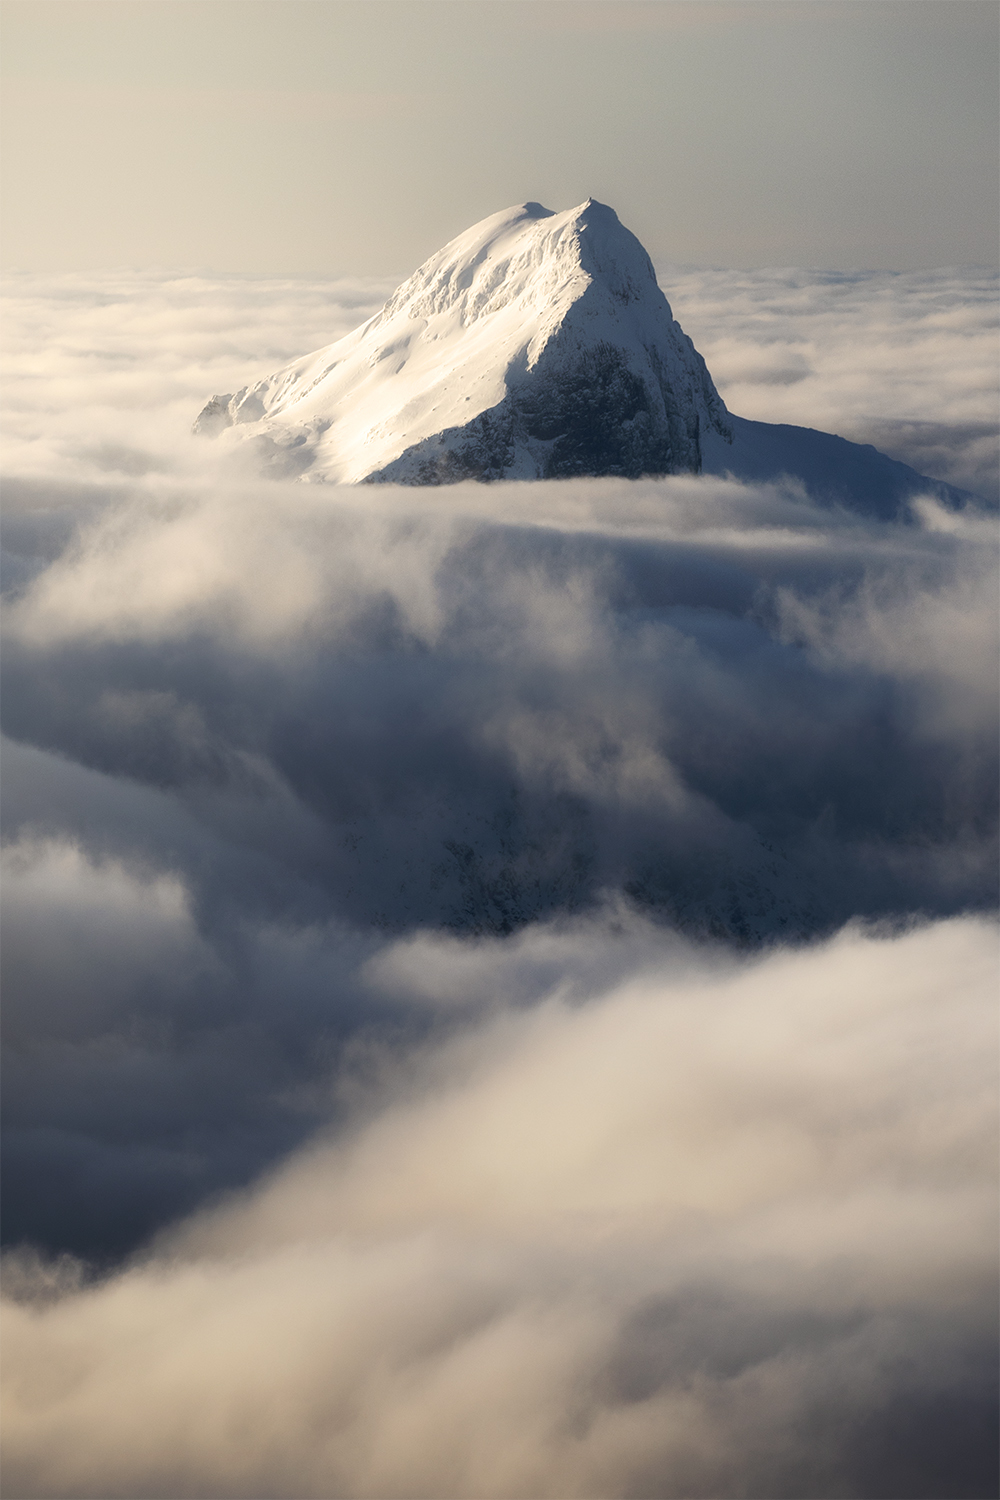 Mountain Peak above the clouds